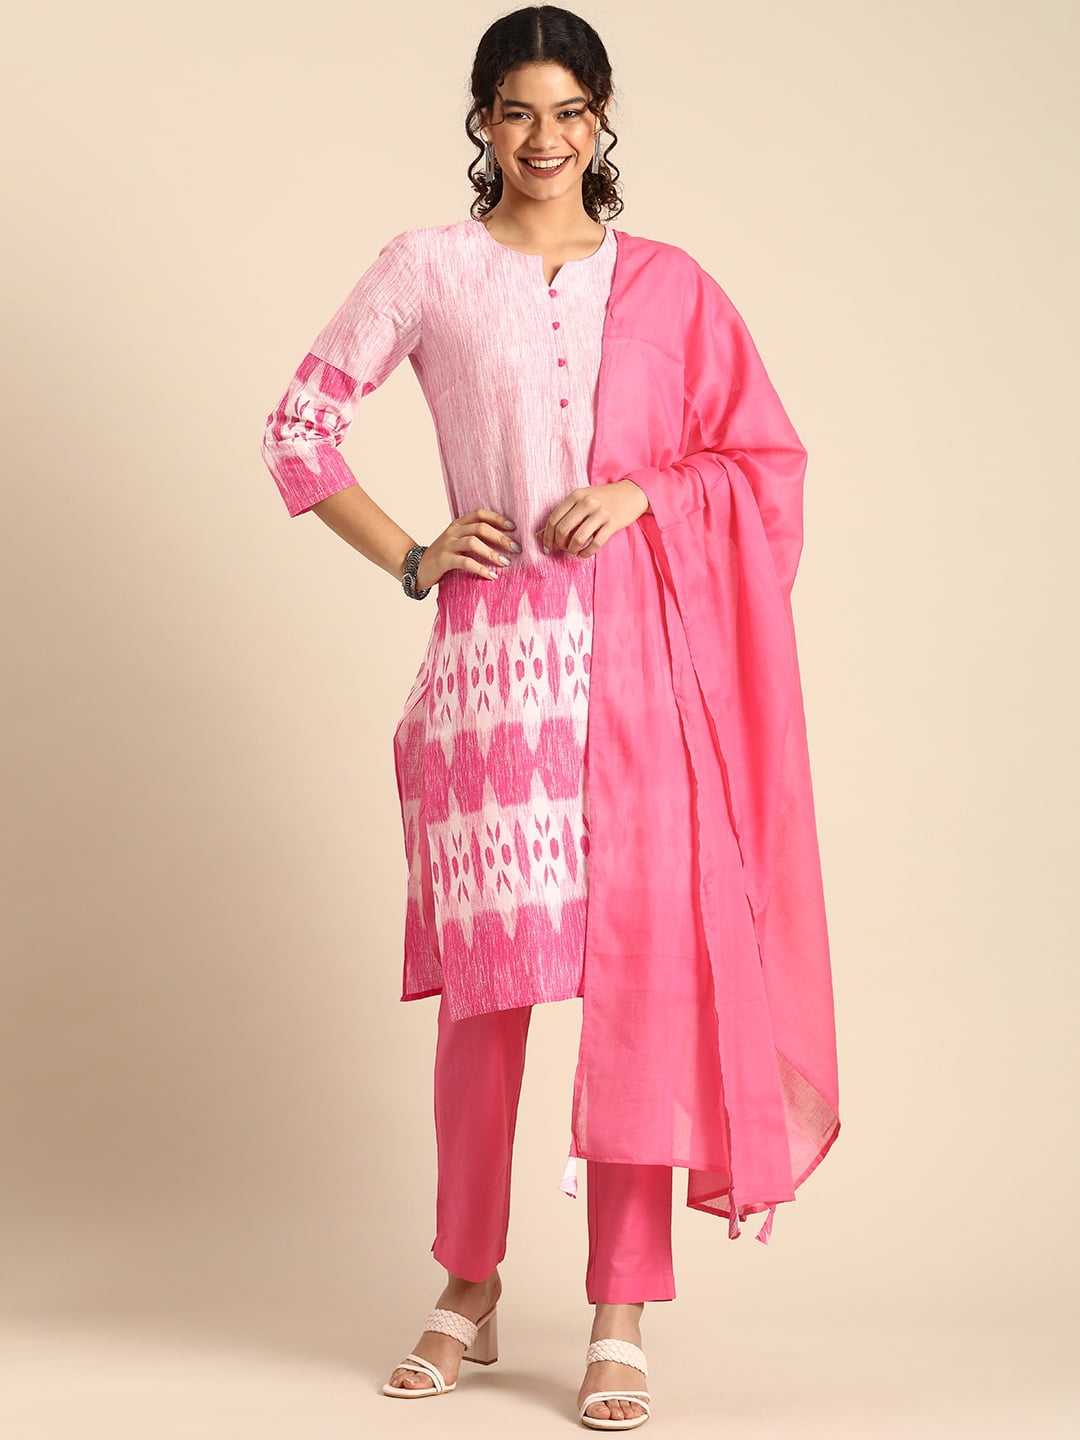 Buy GMH Women's Cotton Ikkat Kurti for Knee Length, Traditional Festive &  Casual Kurta for Women (Small) Pink at Amazon.in